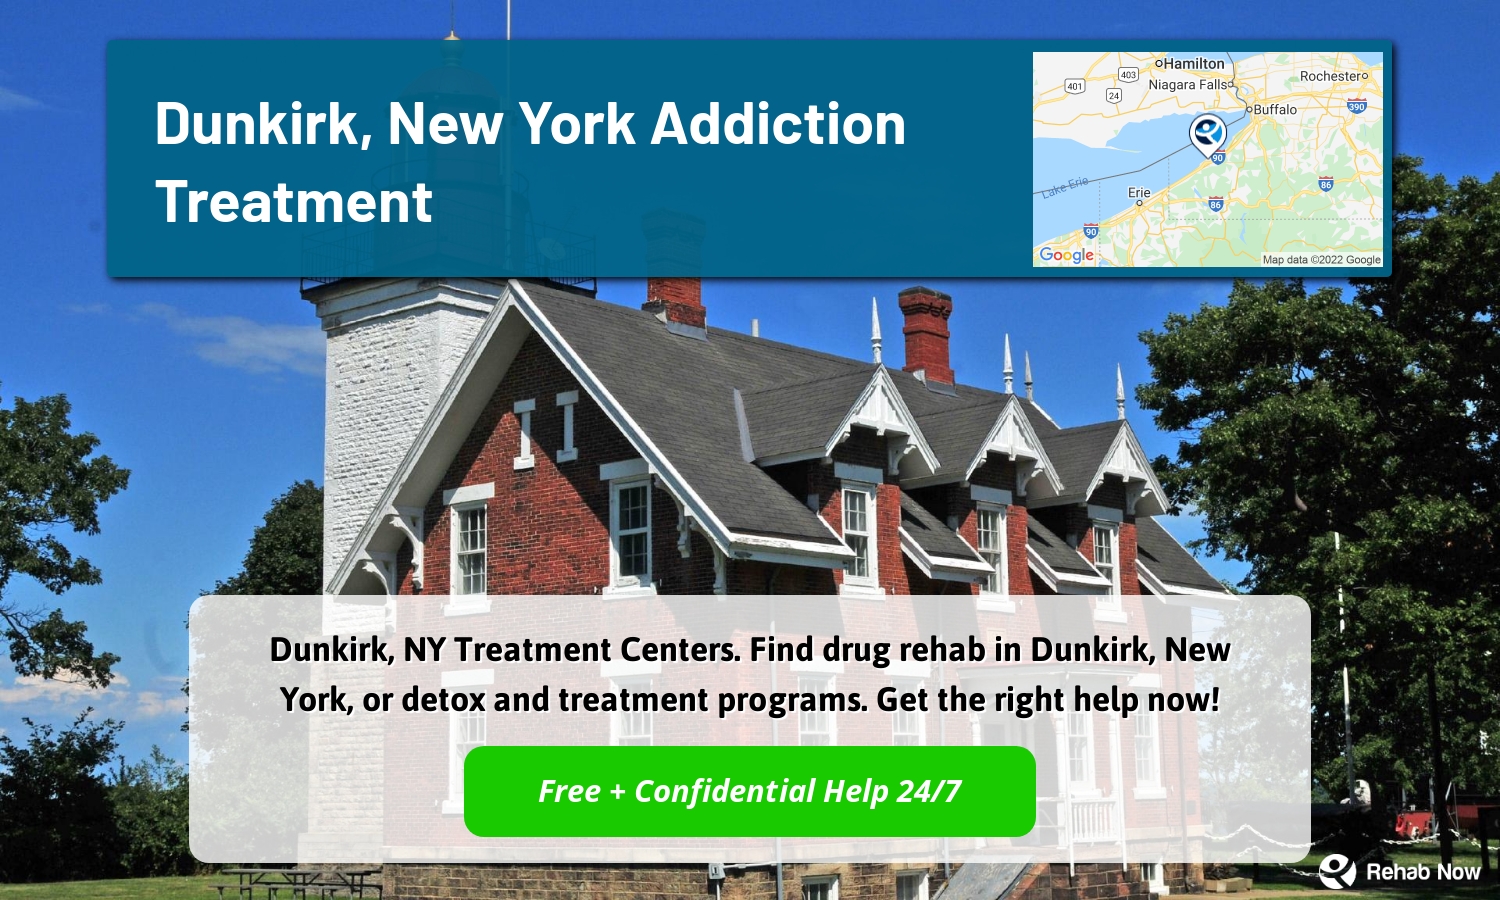 Dunkirk, NY Treatment Centers. Find drug rehab in Dunkirk, New York, or detox and treatment programs. Get the right help now!